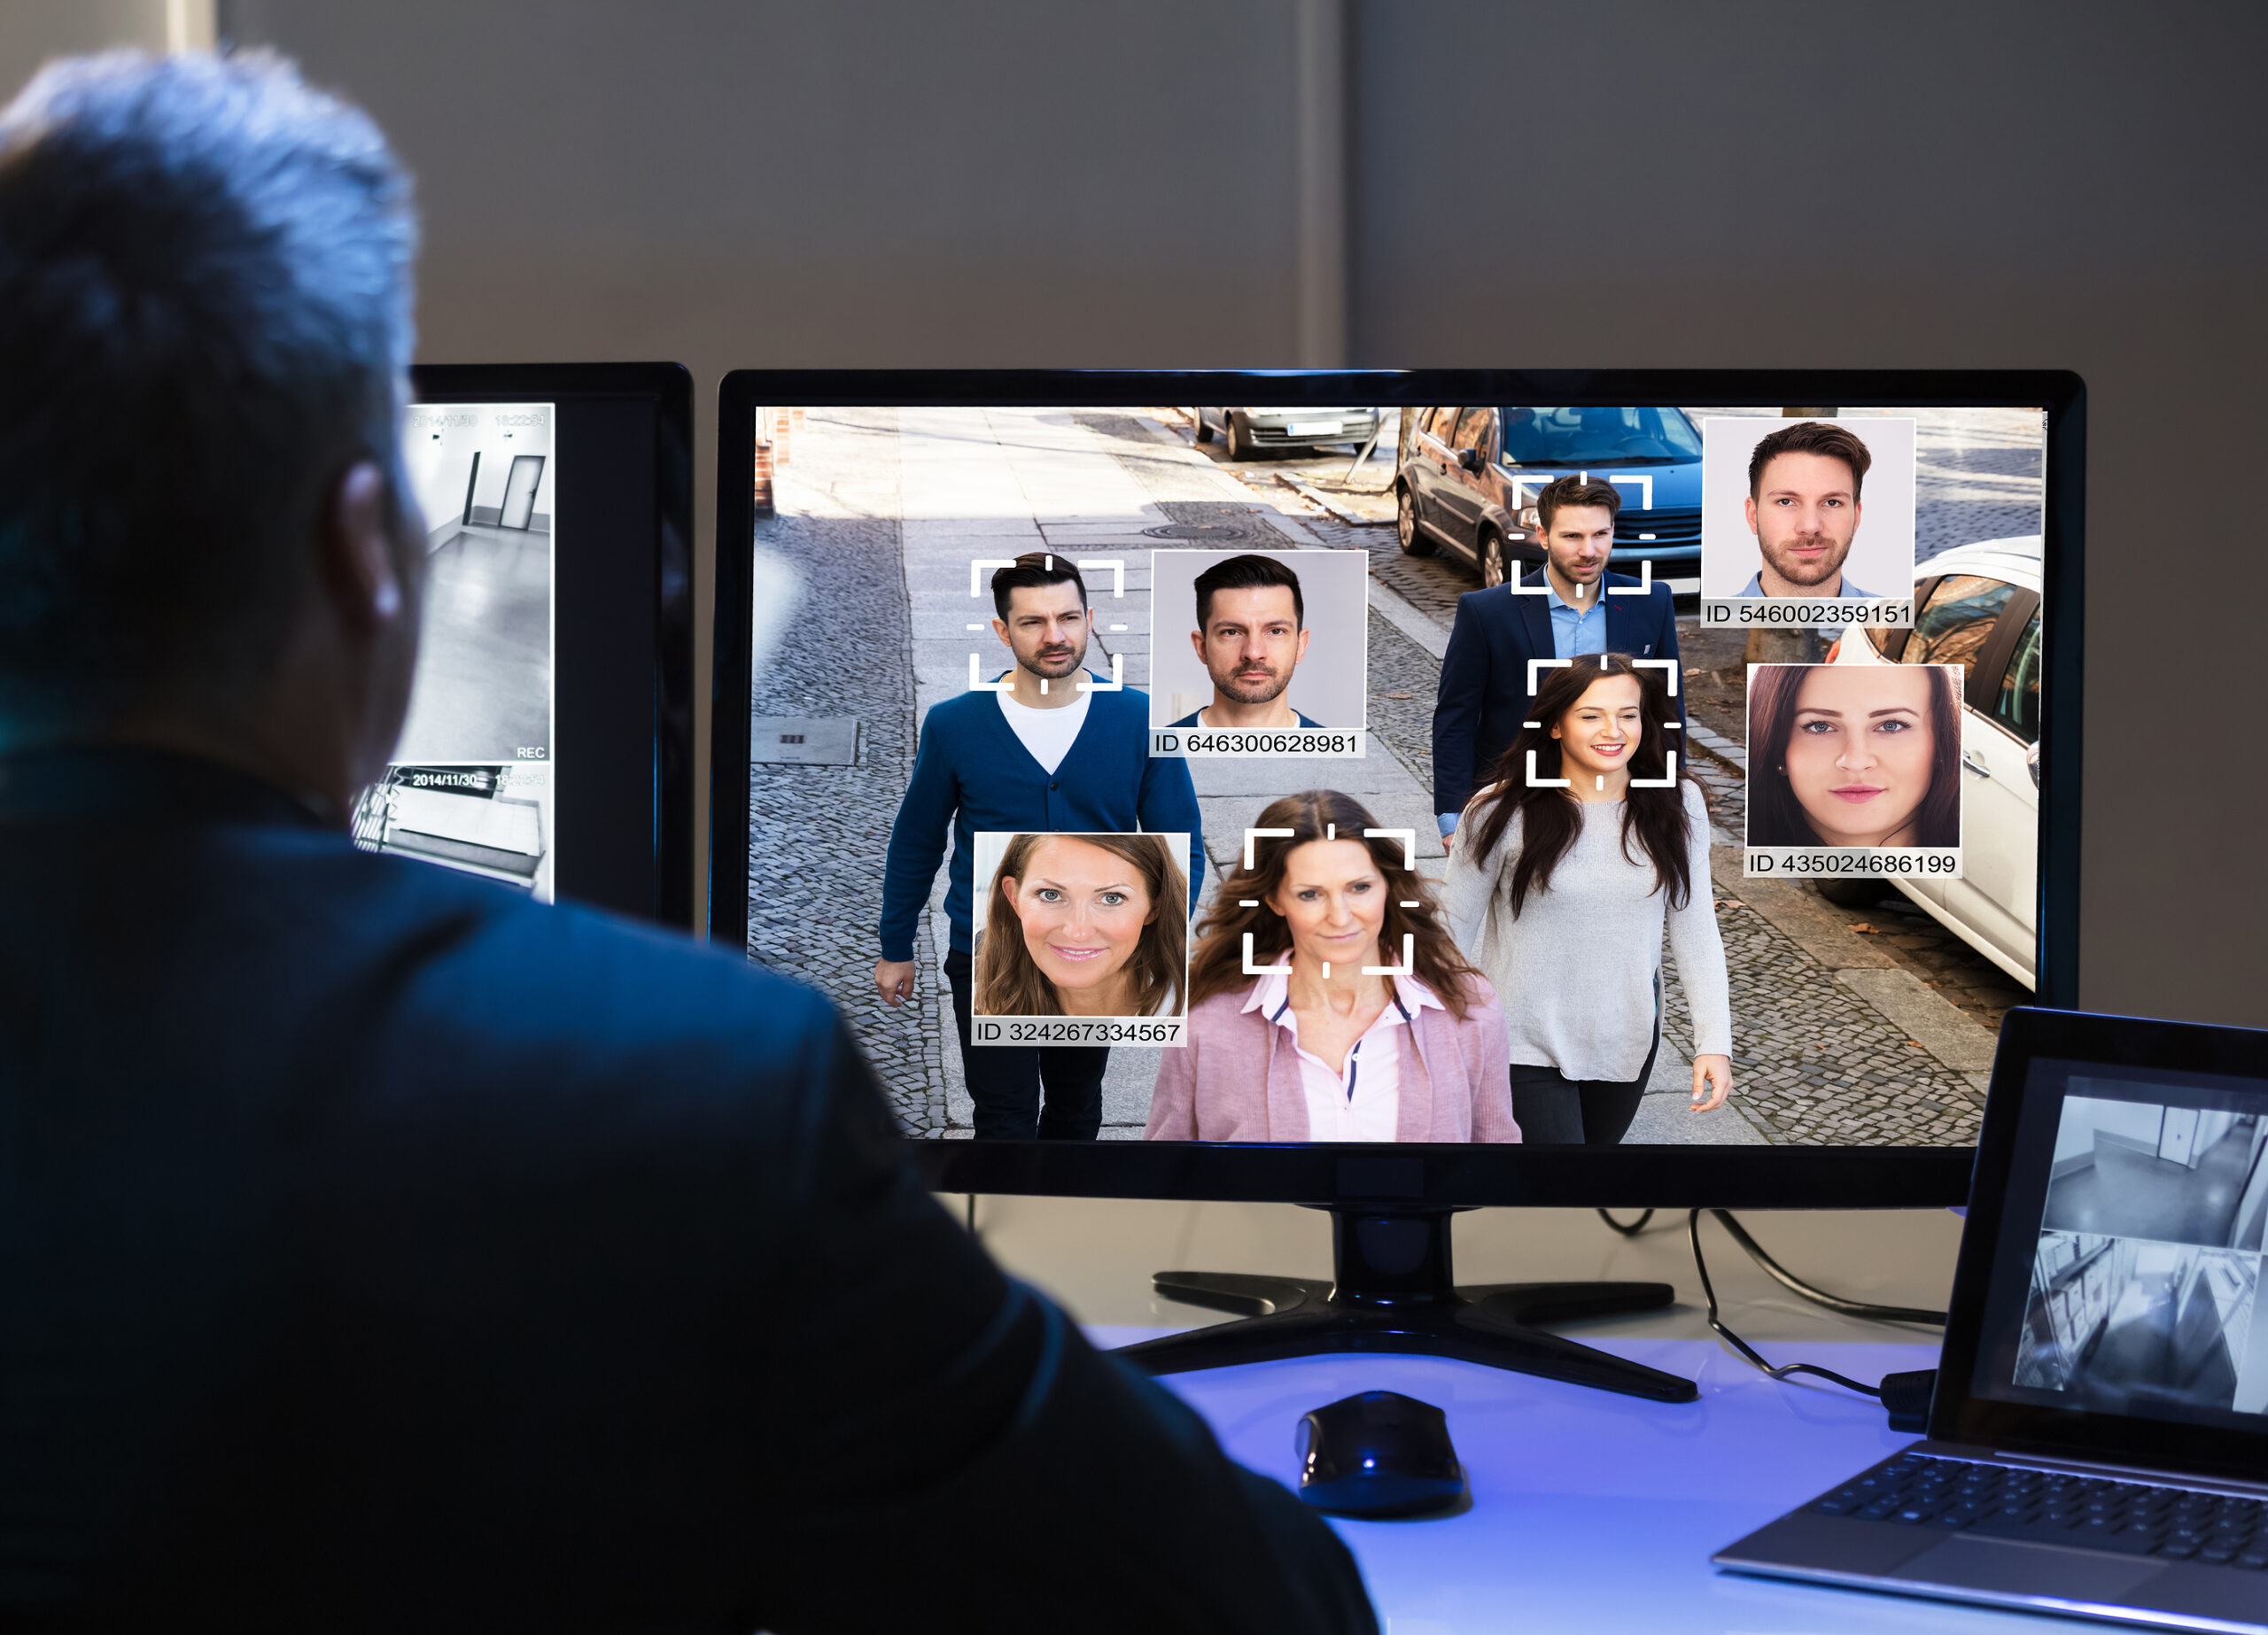 50 Investors Urge Ethical Development Of Facial Recognition Technology